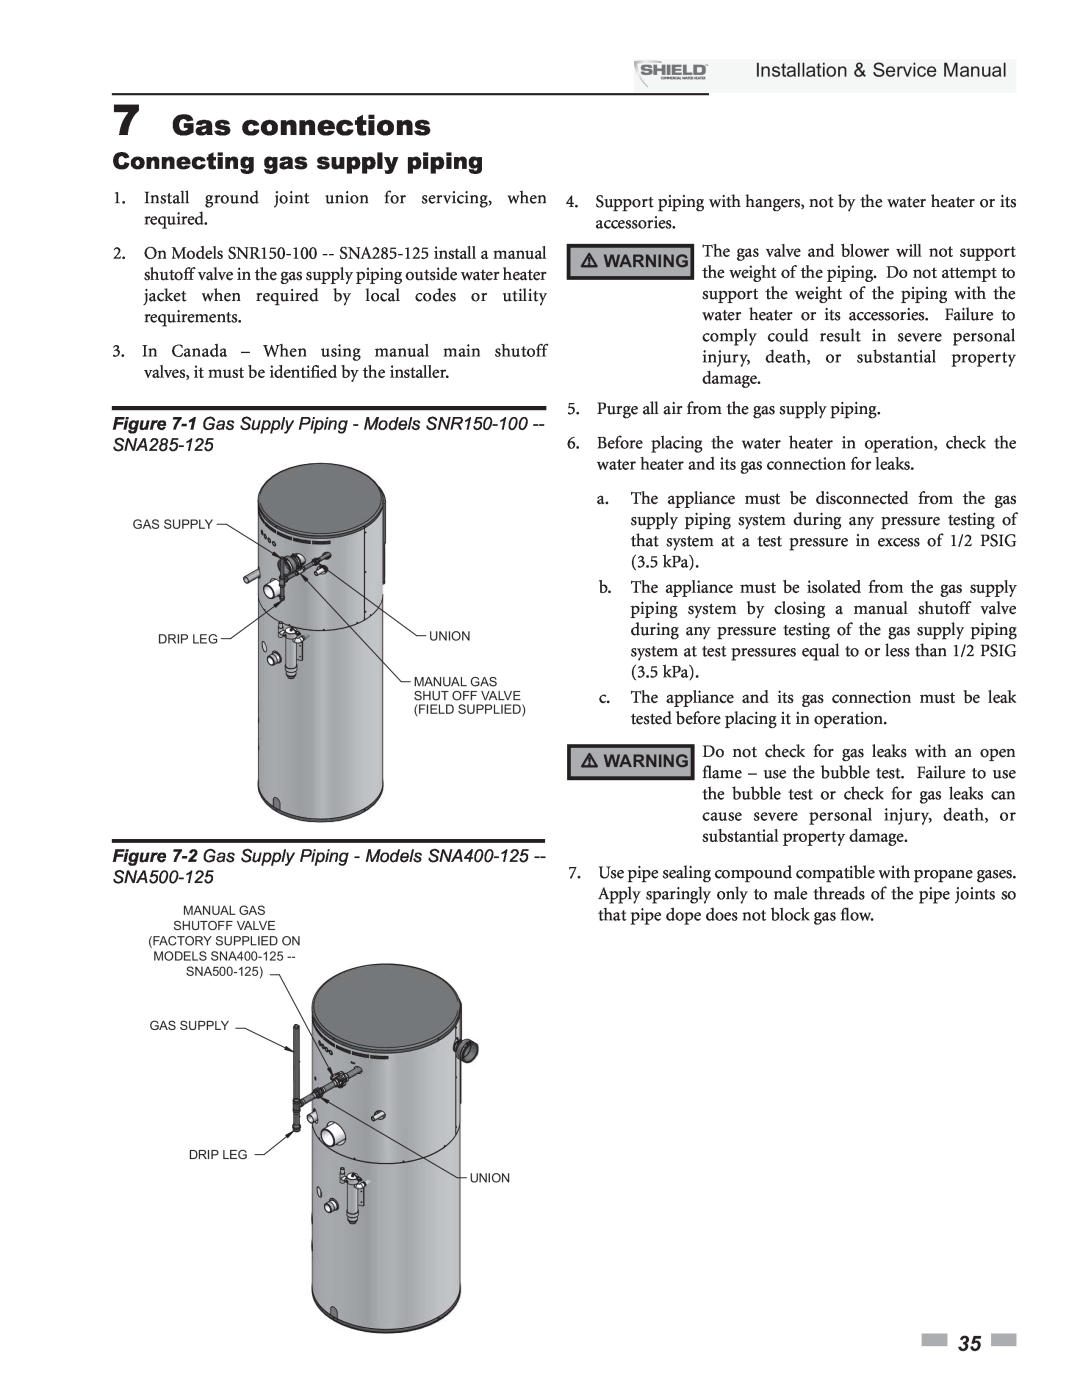 Lochinvar SNA500-125, SNR200-100, SNA285-125 7Gas connections, Connecting gas supply piping, Installation & Service Manual 